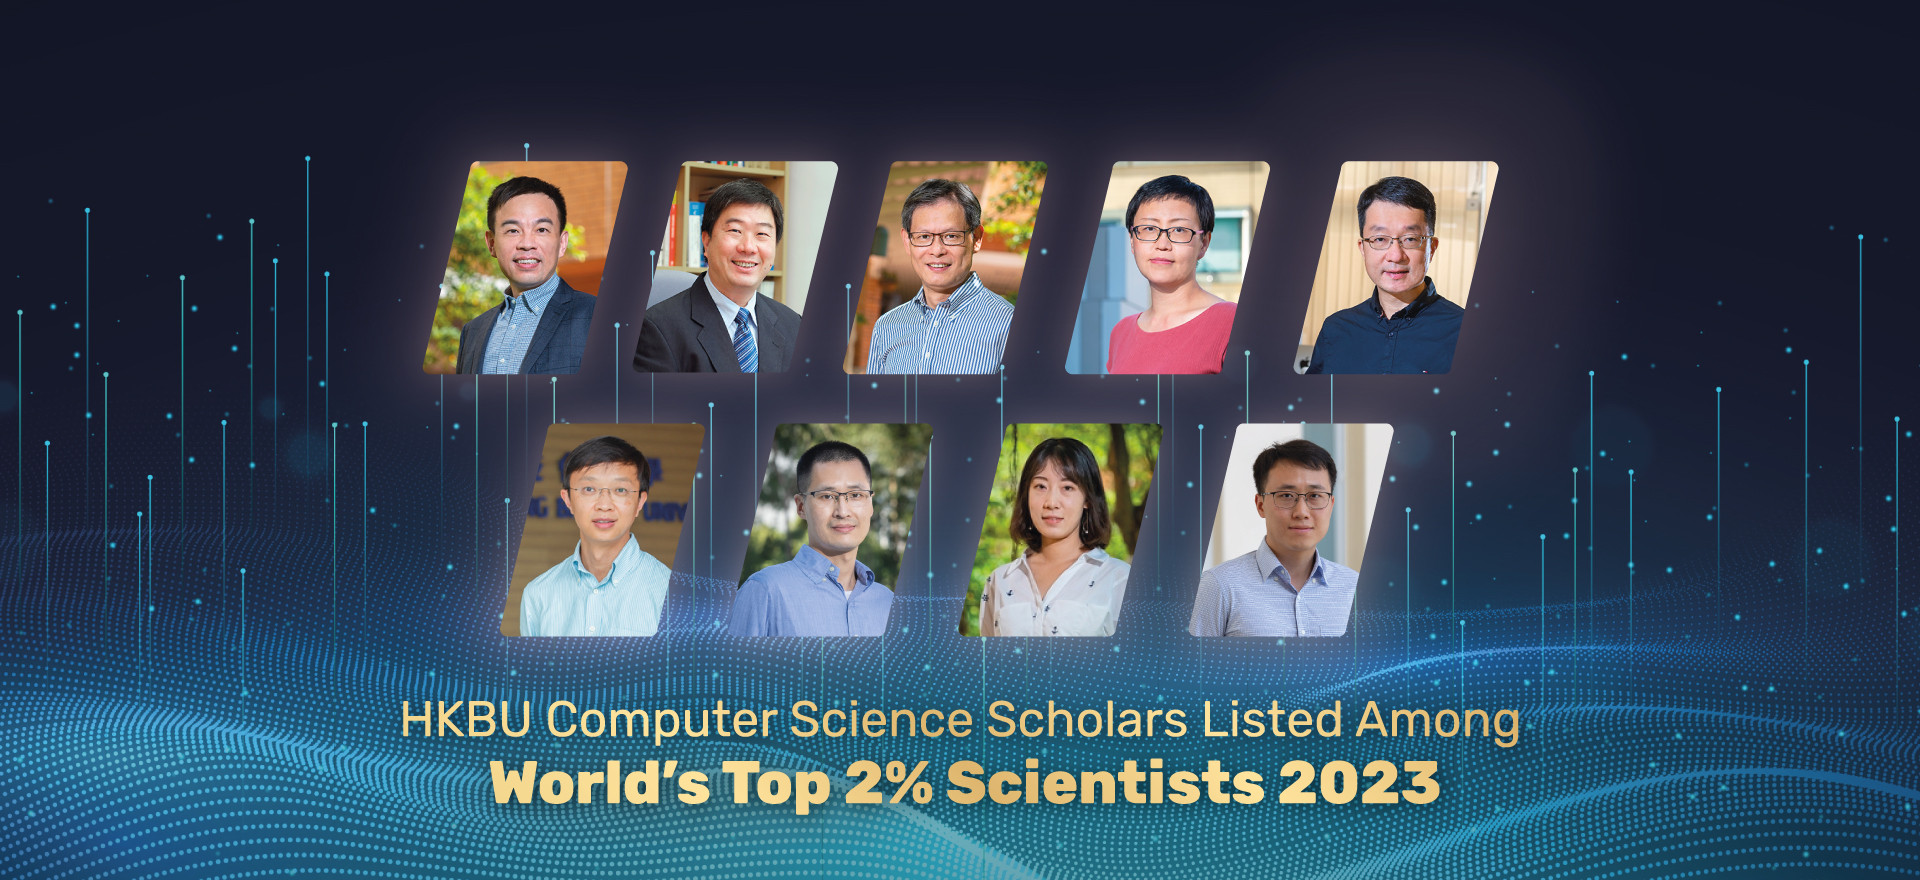 HKBU COMP Scholars Rank the World’s Top 2% Most-cited Scientists by Stanford University